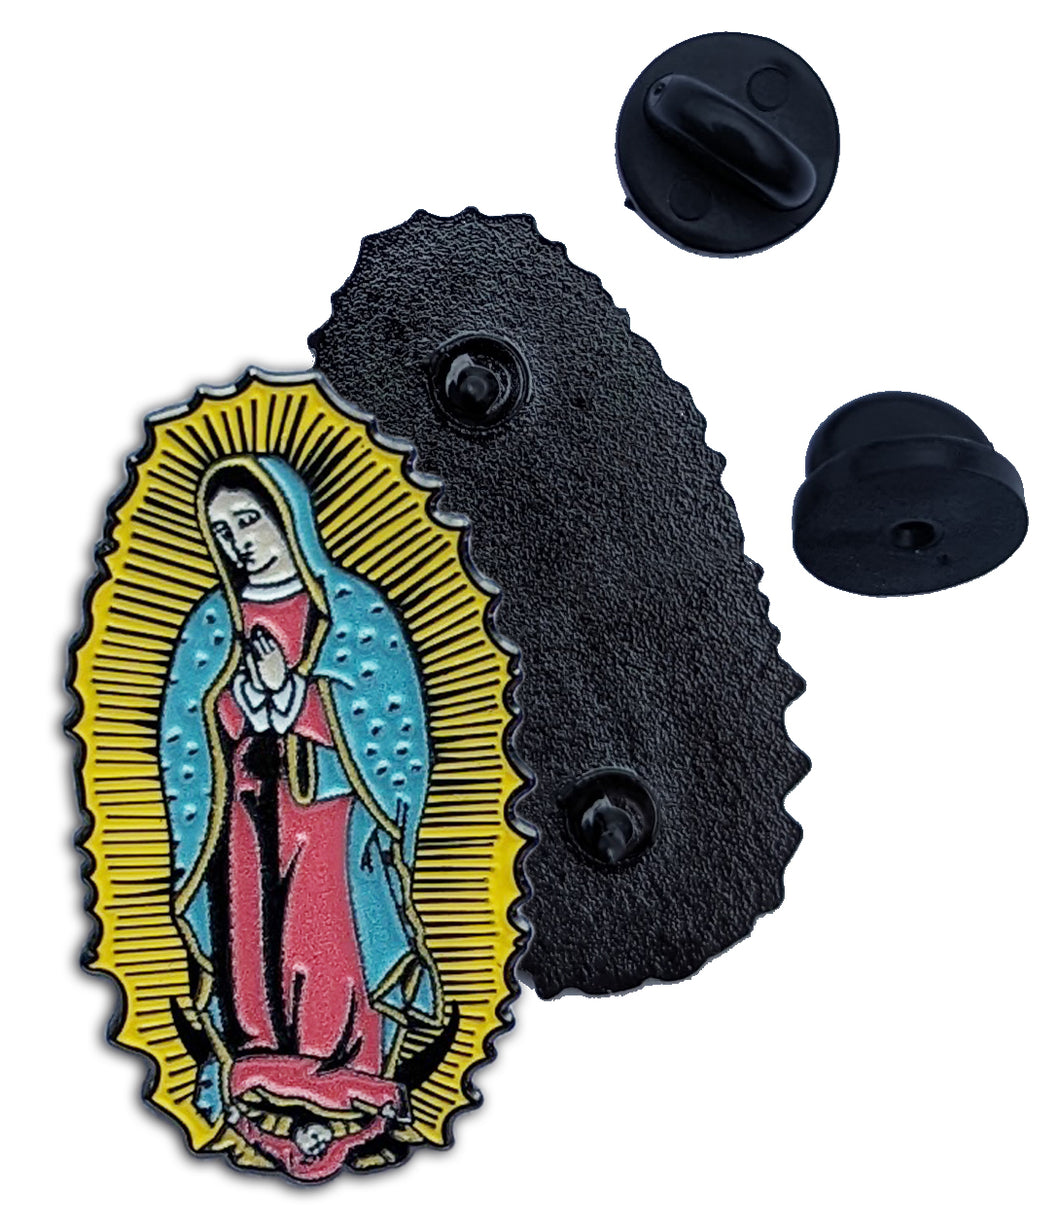 Pin VIrgen de Guadalupe Pin for Caps Clothing Enamel Badge Pin Guadalupana Pin For Caps And Clothing Enamel Badge Religious pin Virgin Mary